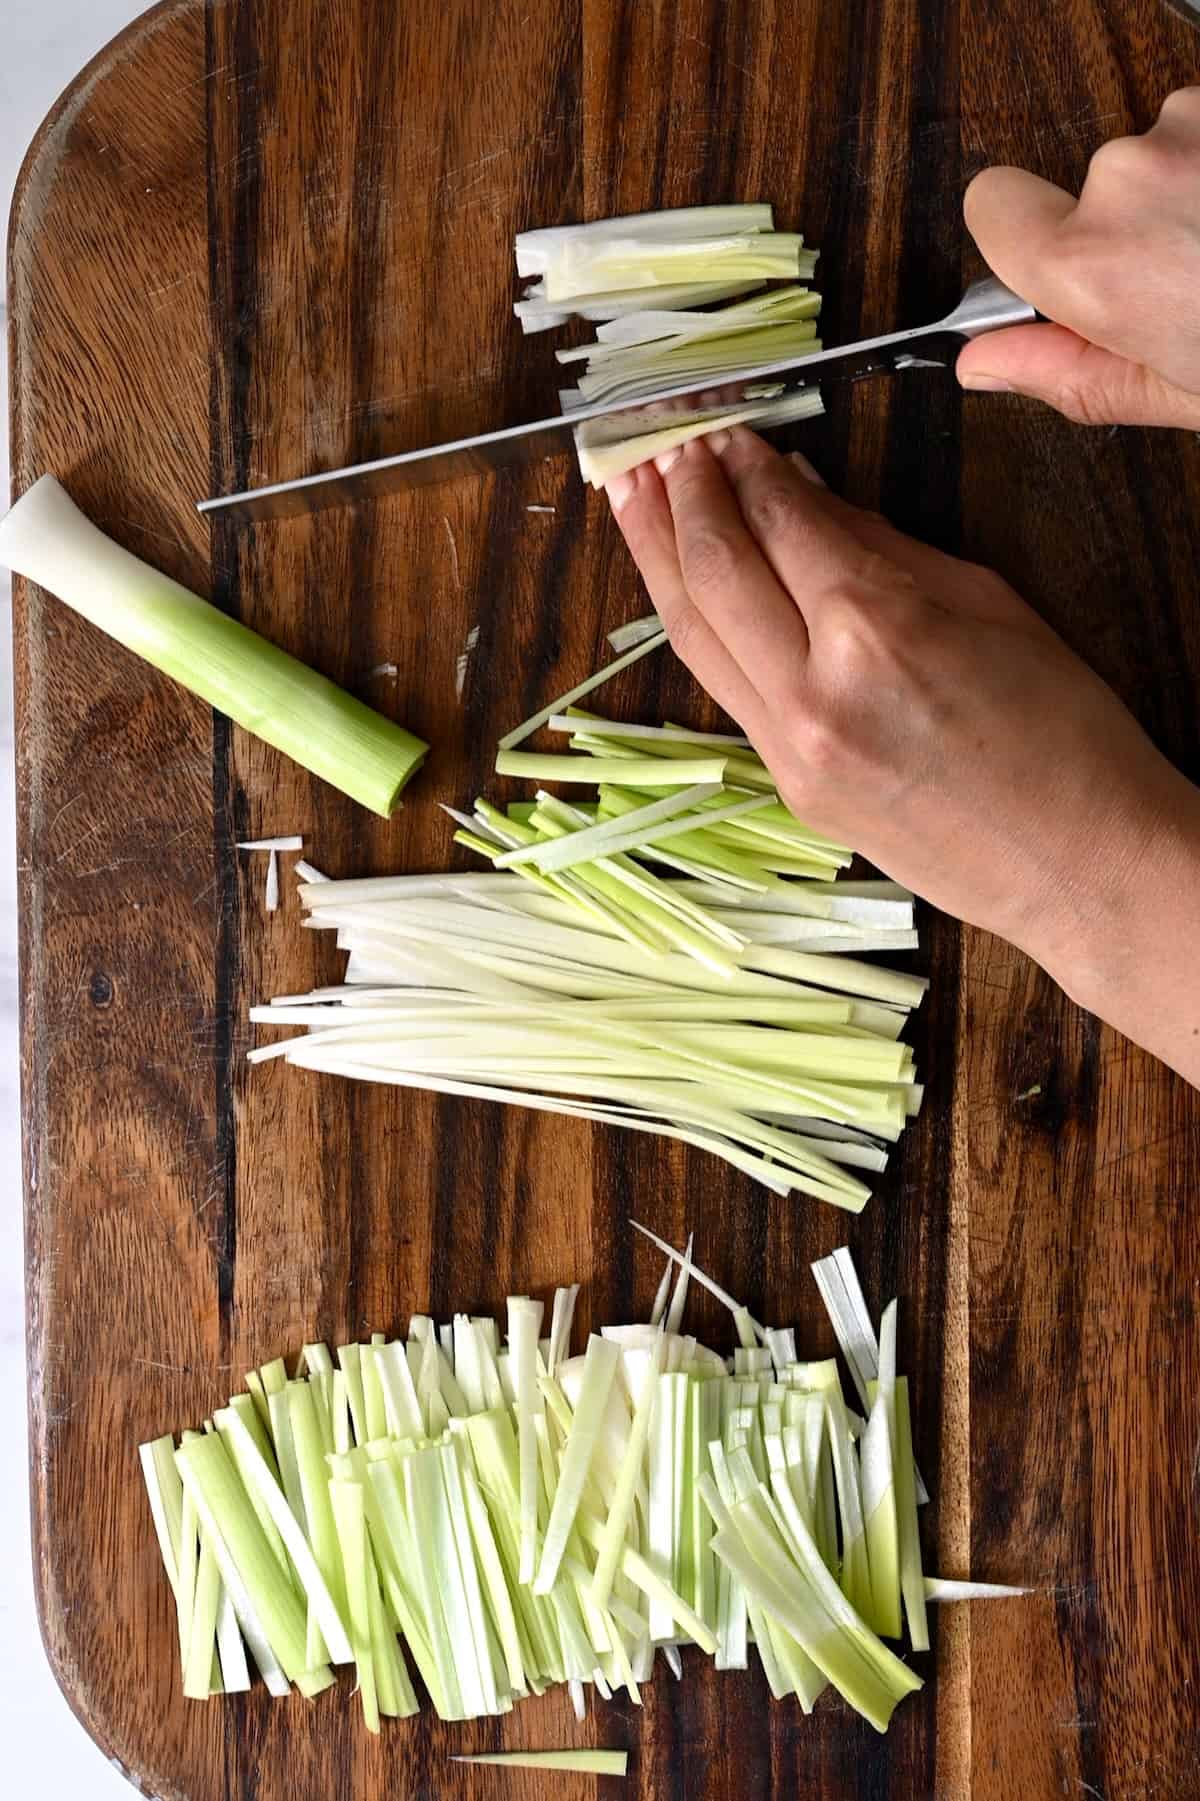 Cutting leeks into thin slices